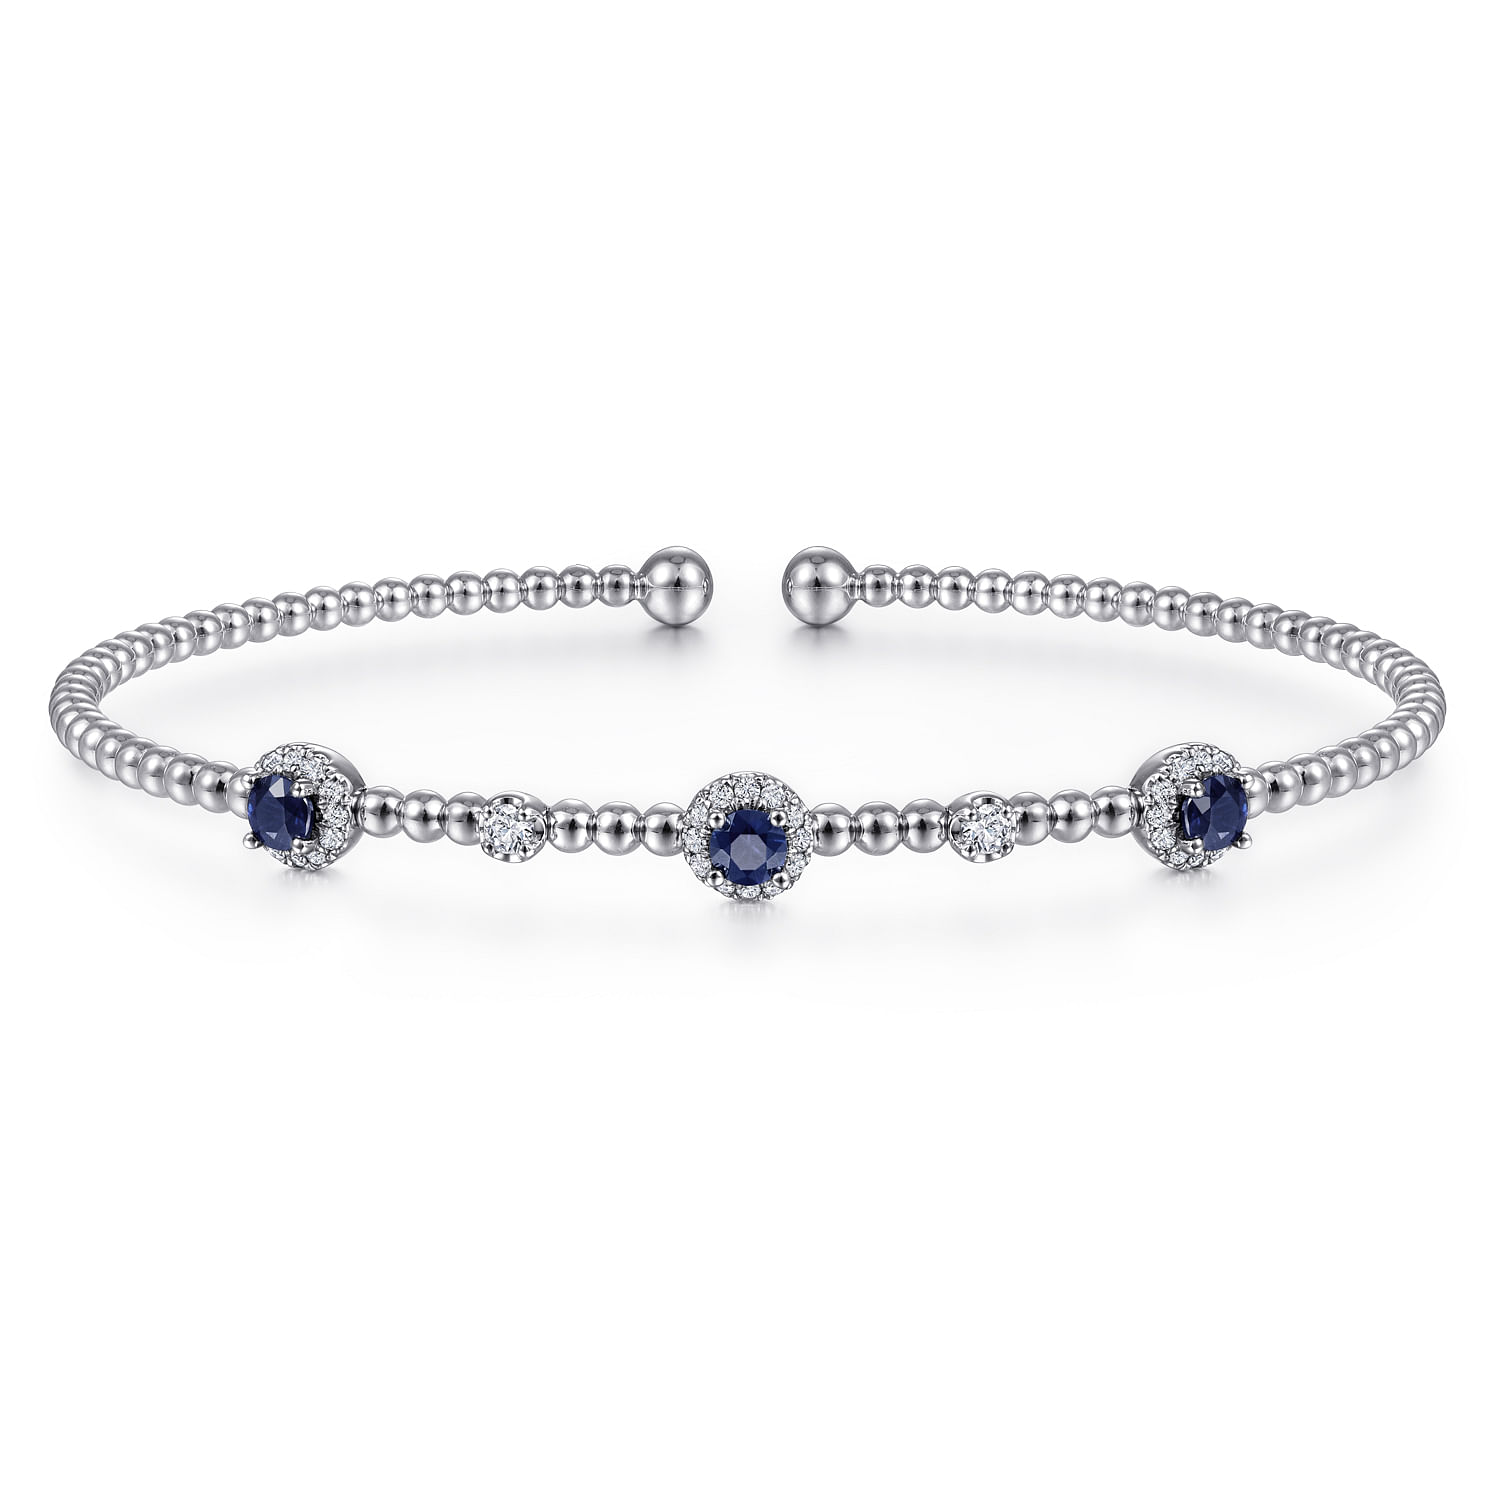 14K White Gold Bujukan Bead Cuff Bracelet with Sapphire and Diamond Halo Stations